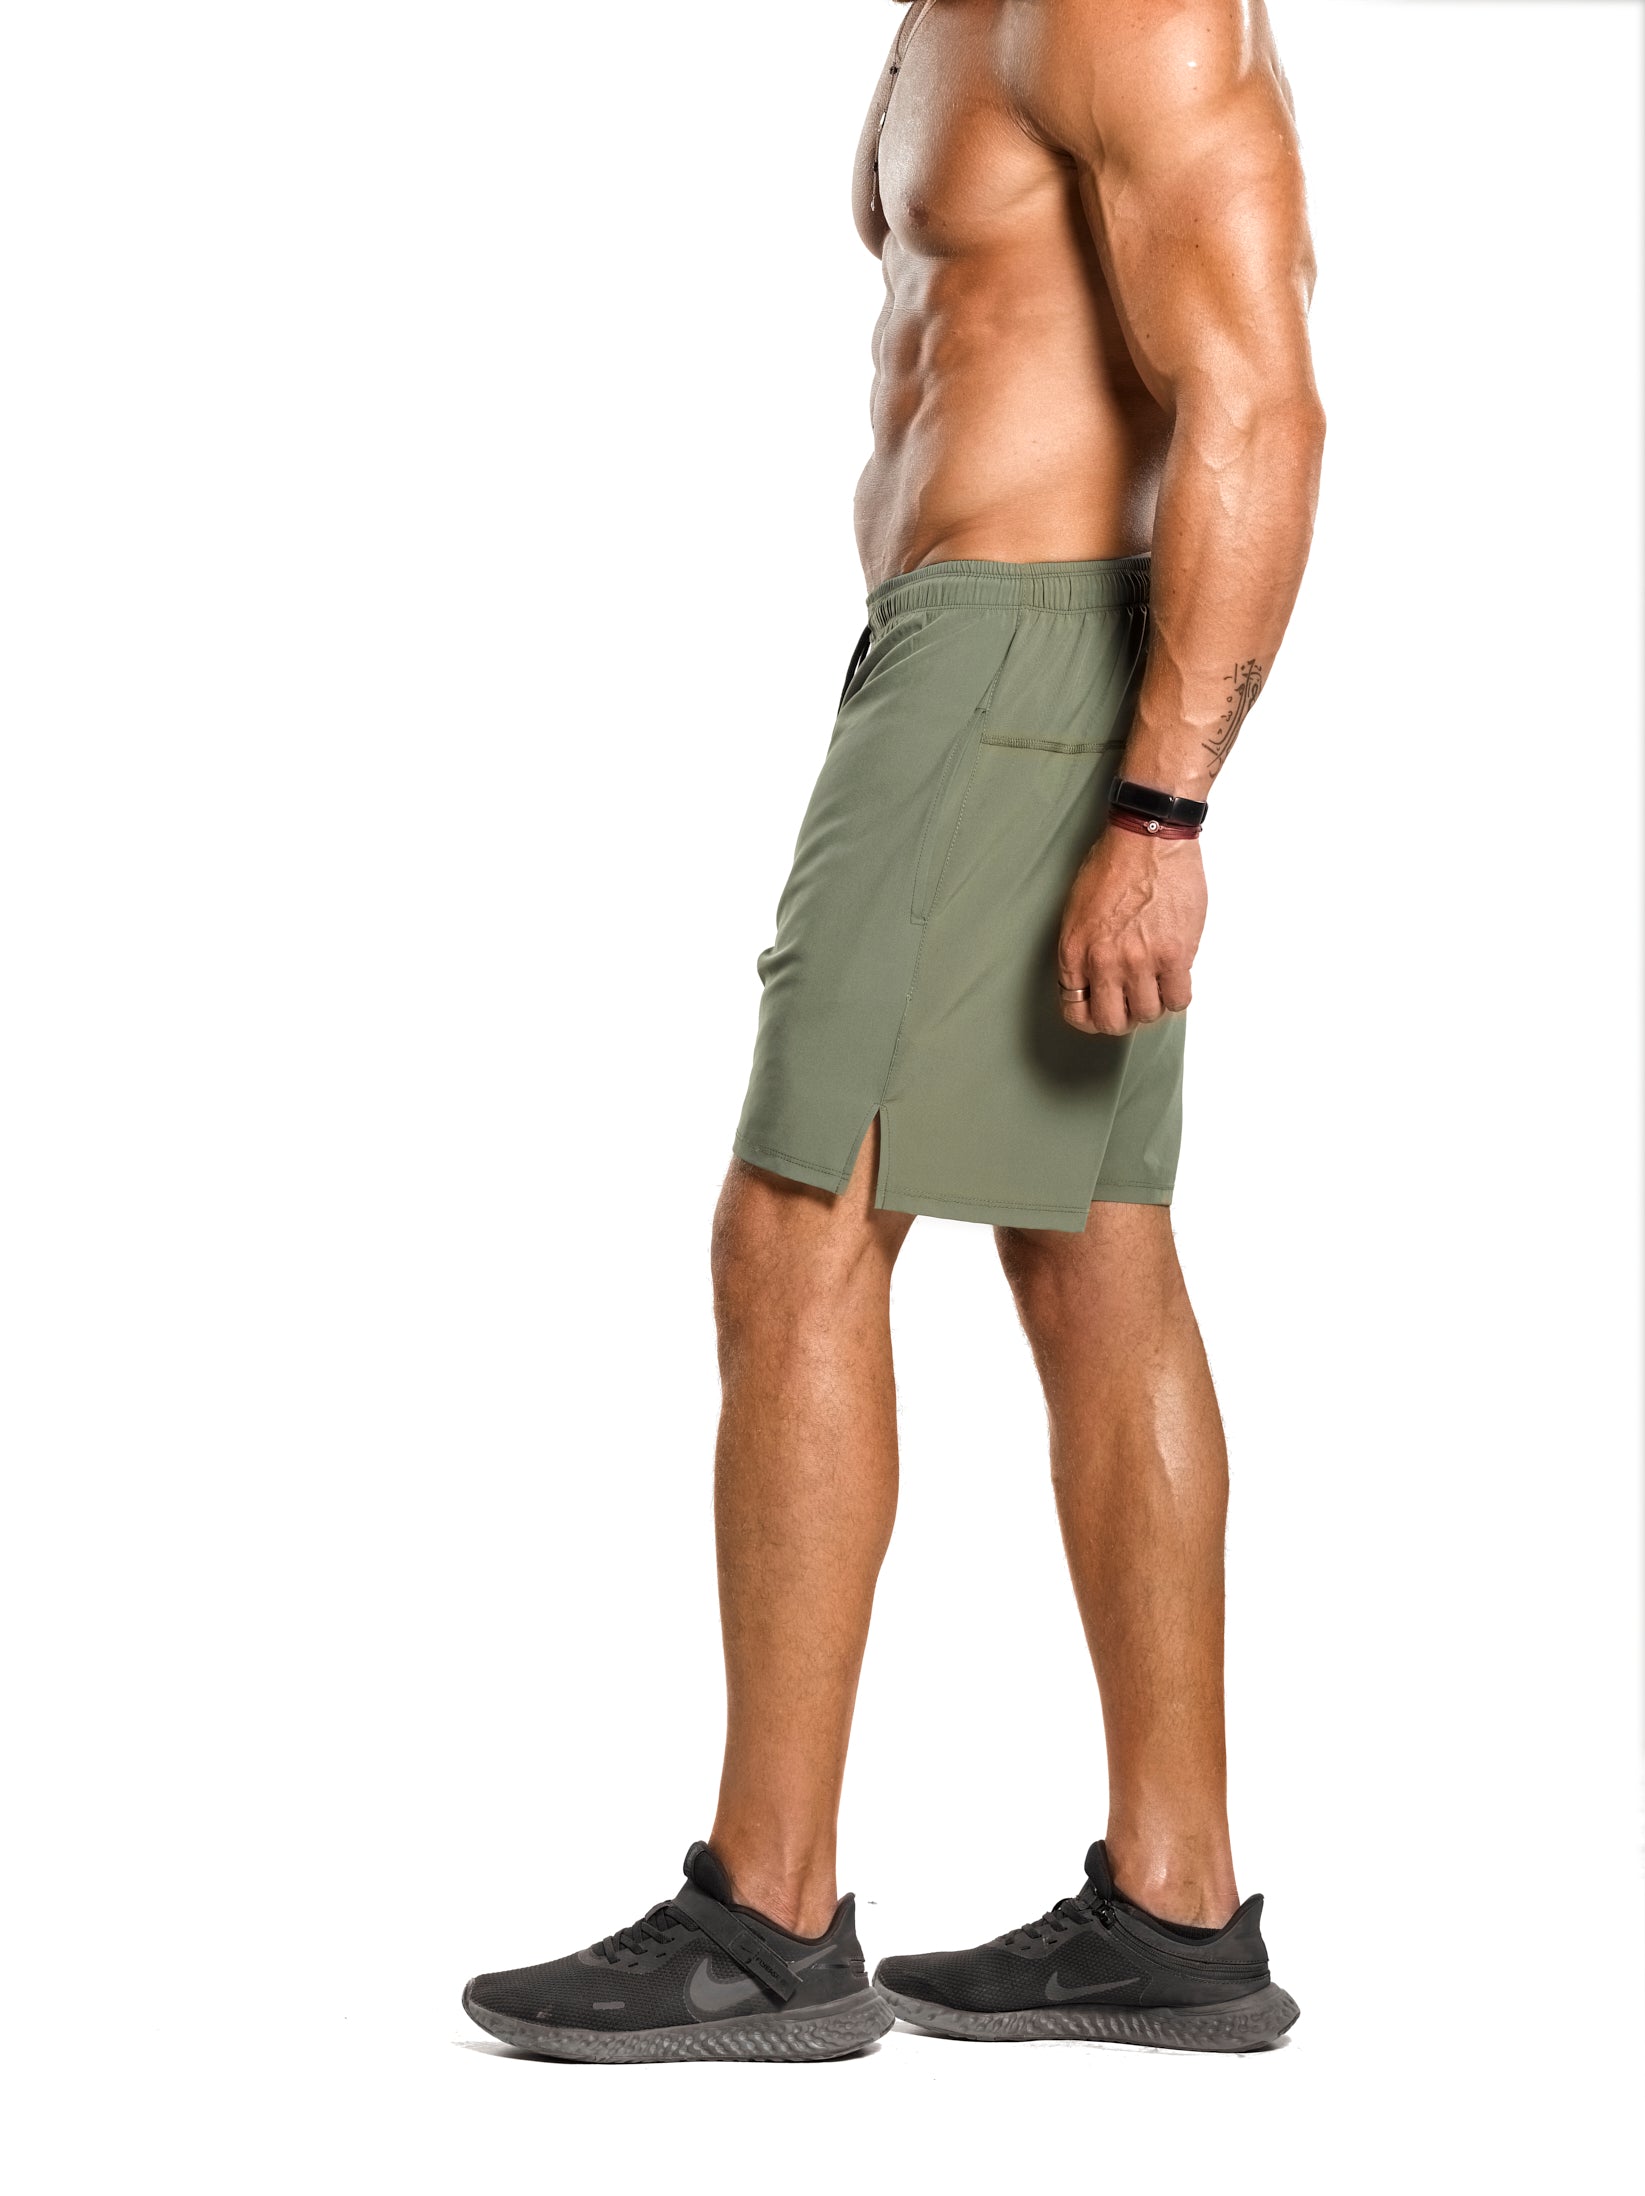 Featherweight Training Shorts [Olive Green] - Shorts - Gym Apparel Egypt